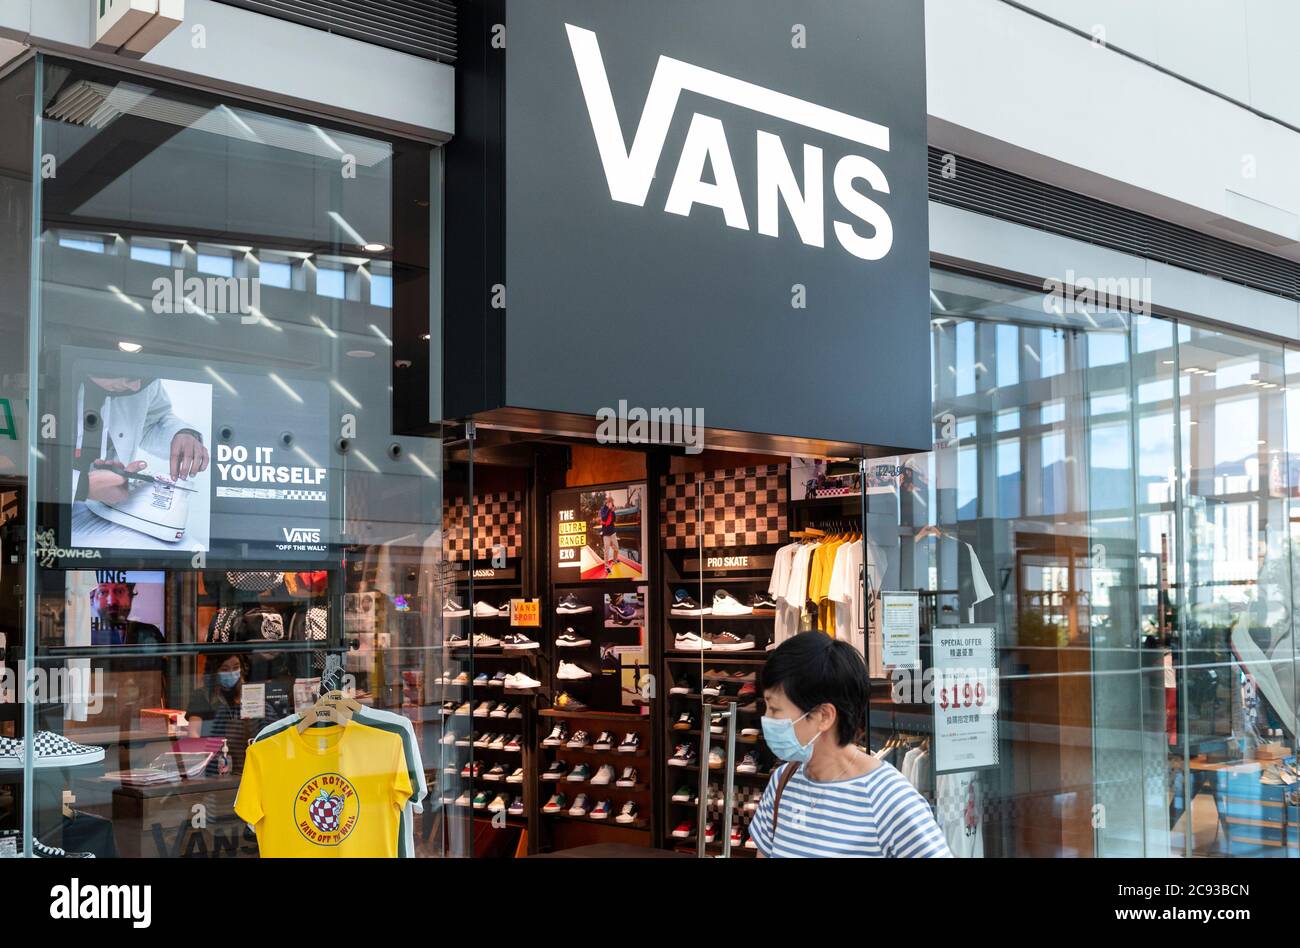 Vans Store High Resolution Stock Photography and Images - Alamy